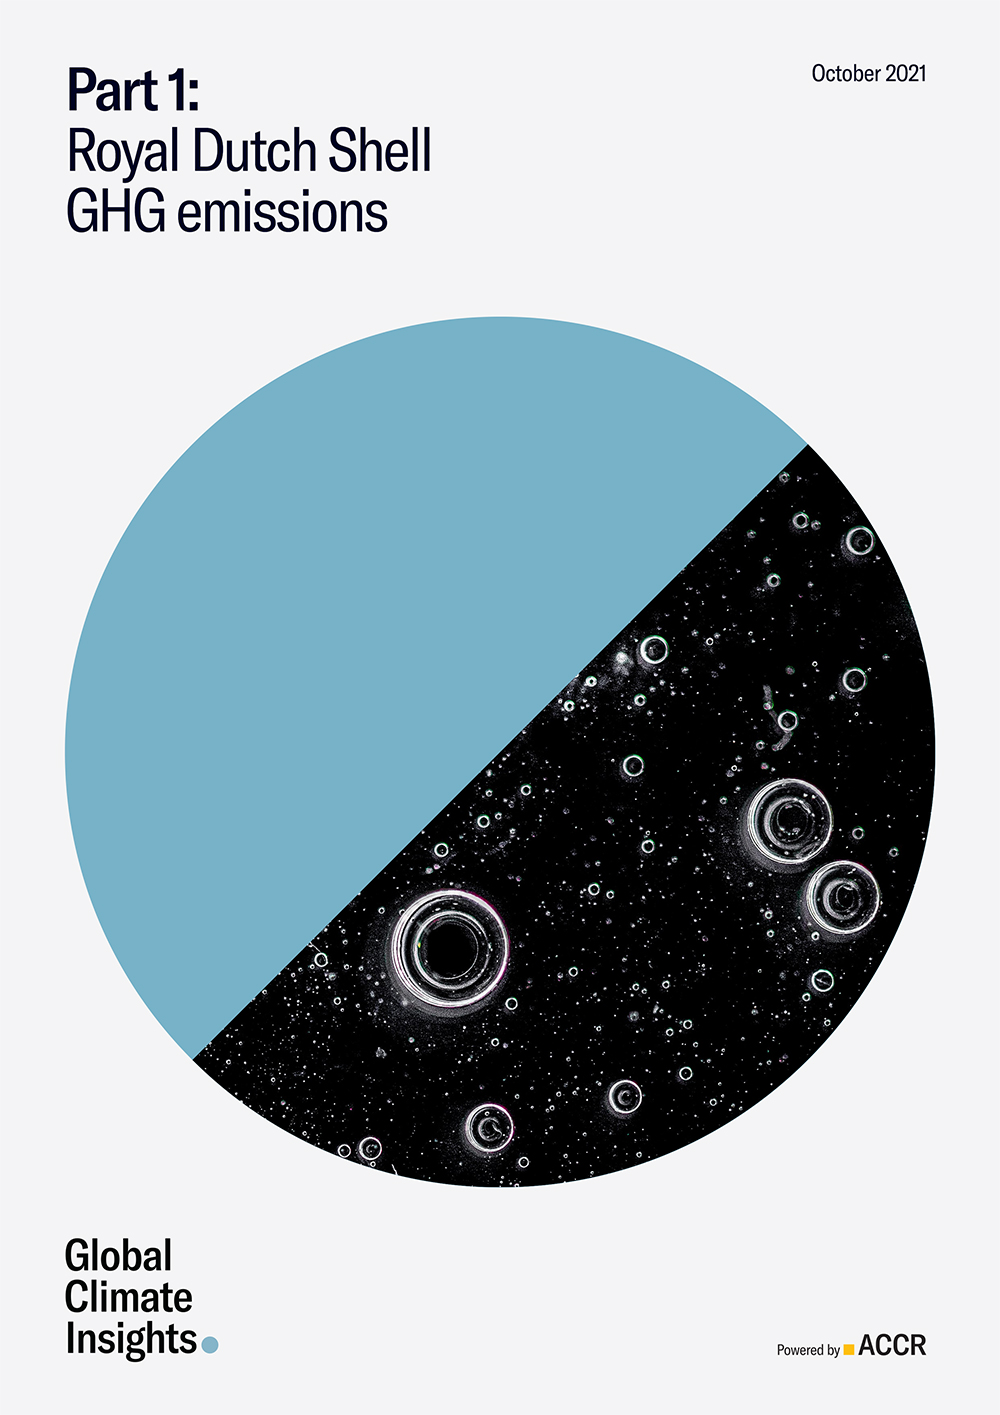 Cover page of the Part 1: Royal Dutch Shell GHG emissions publication.